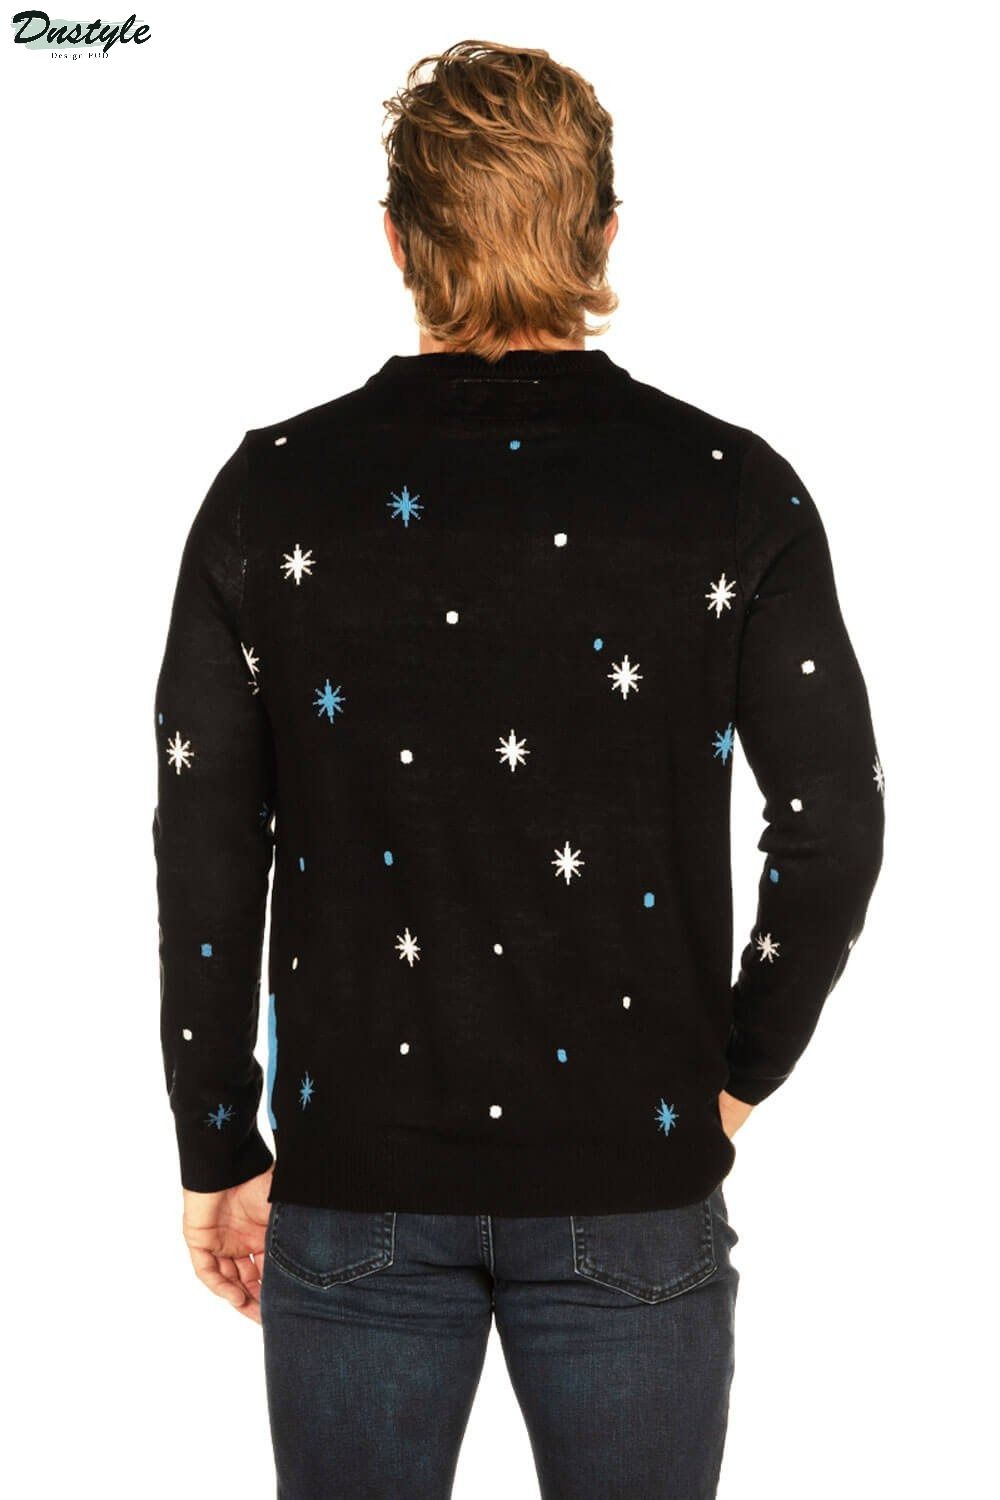 Bezos Blue Origin You Paid For This Ugly Christmas Sweater 1